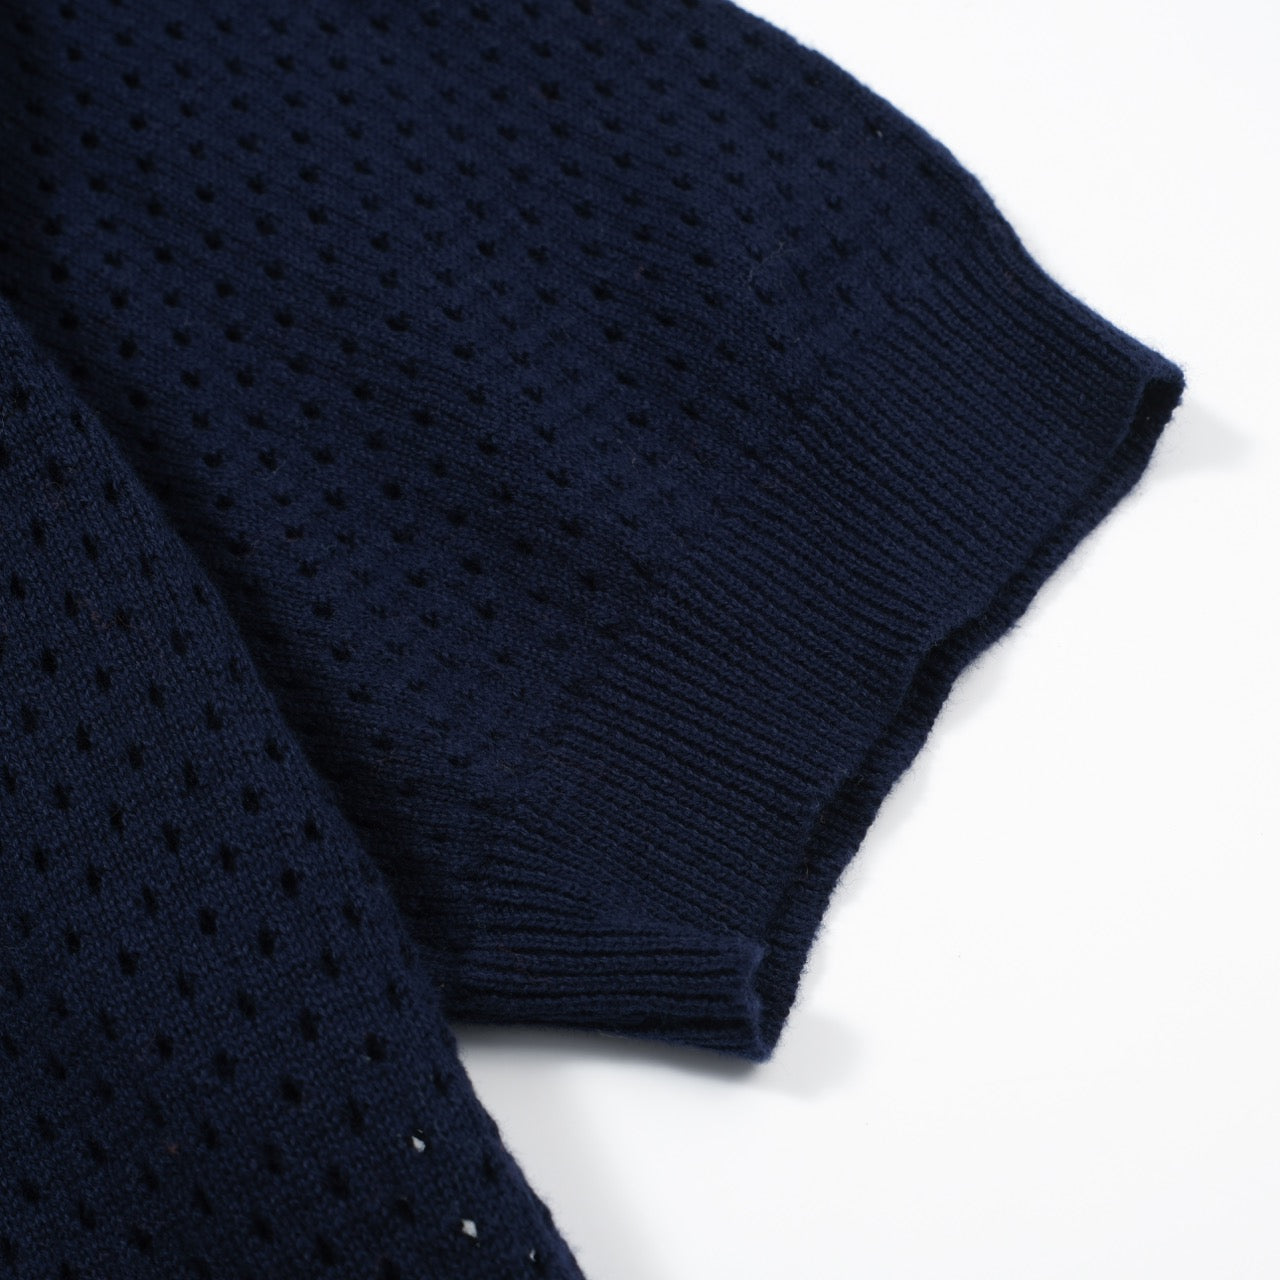 Men's Navy Blue Knitted Short Sleeves Polo